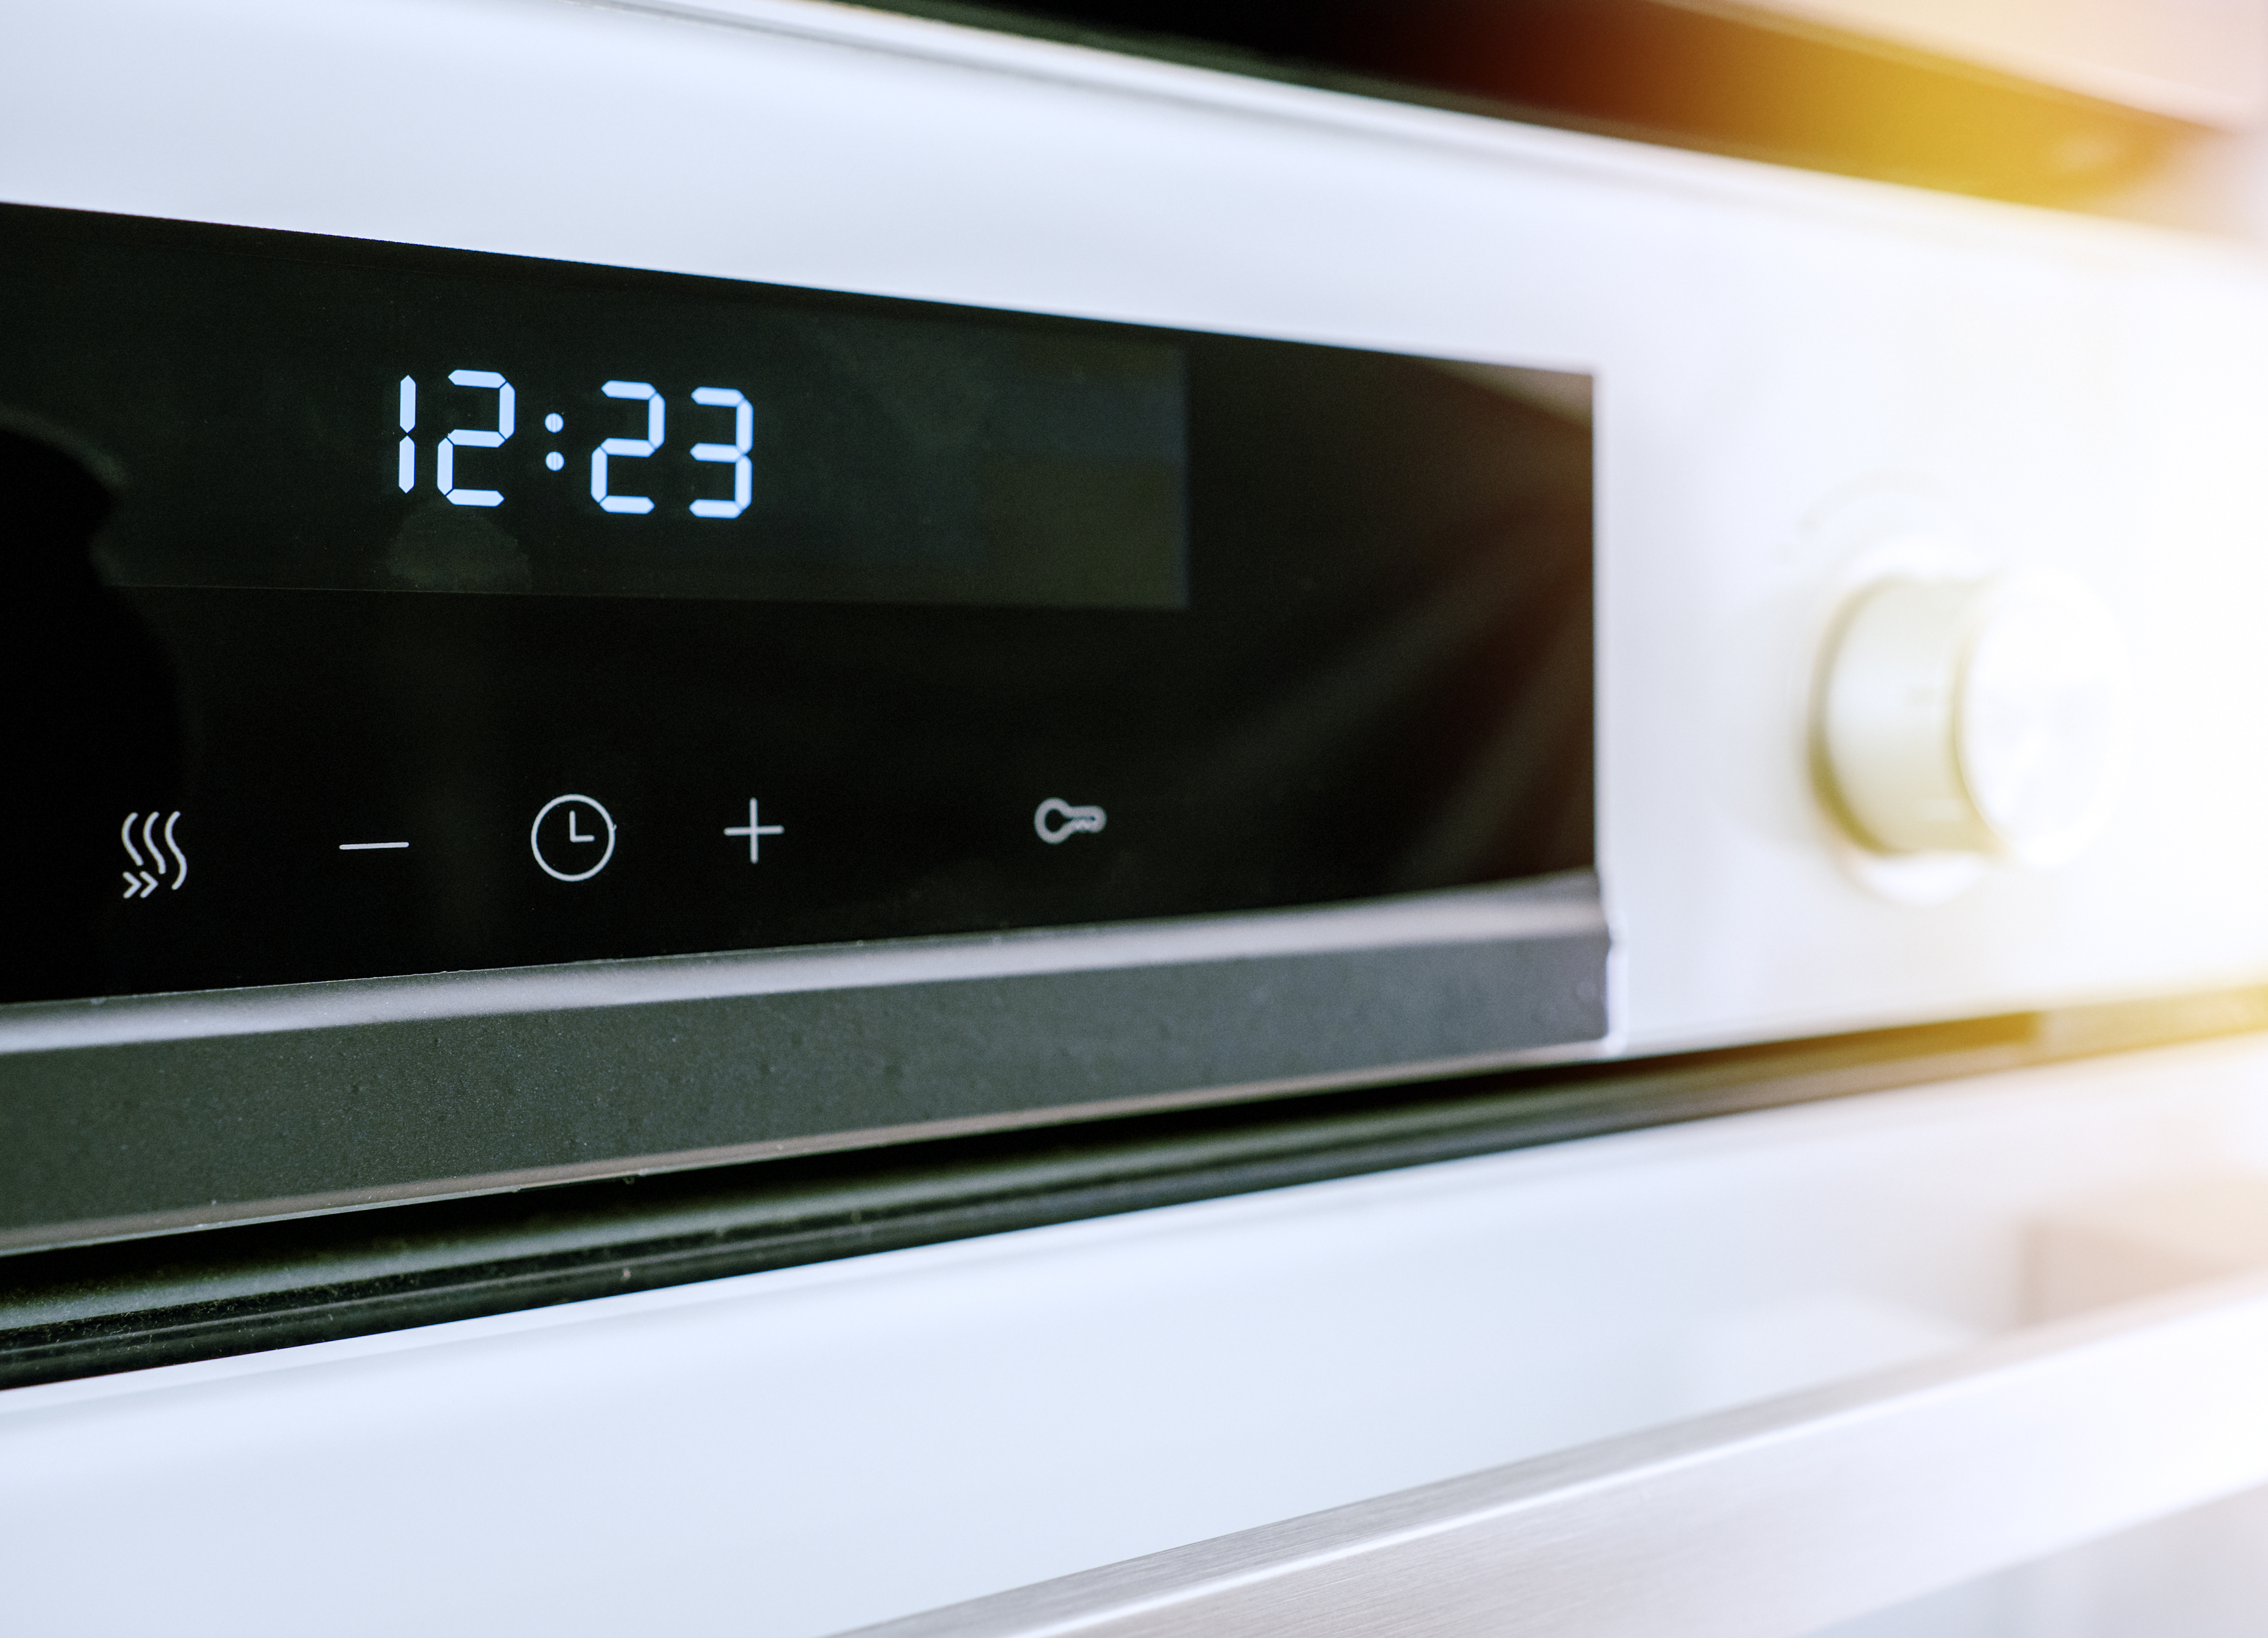 How to set the time of a Whirlpool oven? 